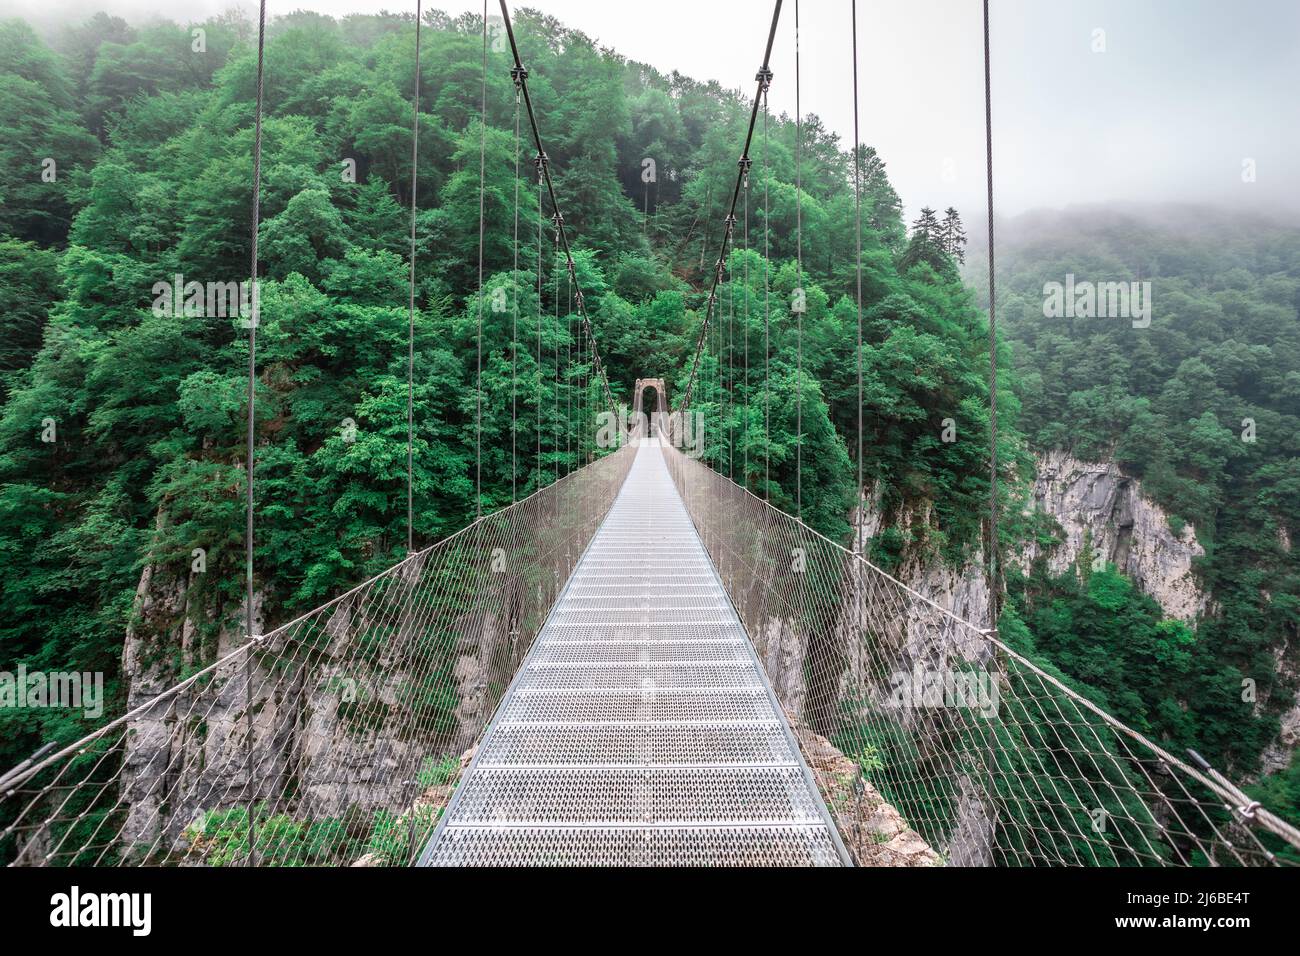 Passerelle d'Holzarte Bridge in Haute-Soule, in the French Basque Country.  It's a narrow pedestrian bridge dating from 1920, suspended 180 m. above a Stock Photo